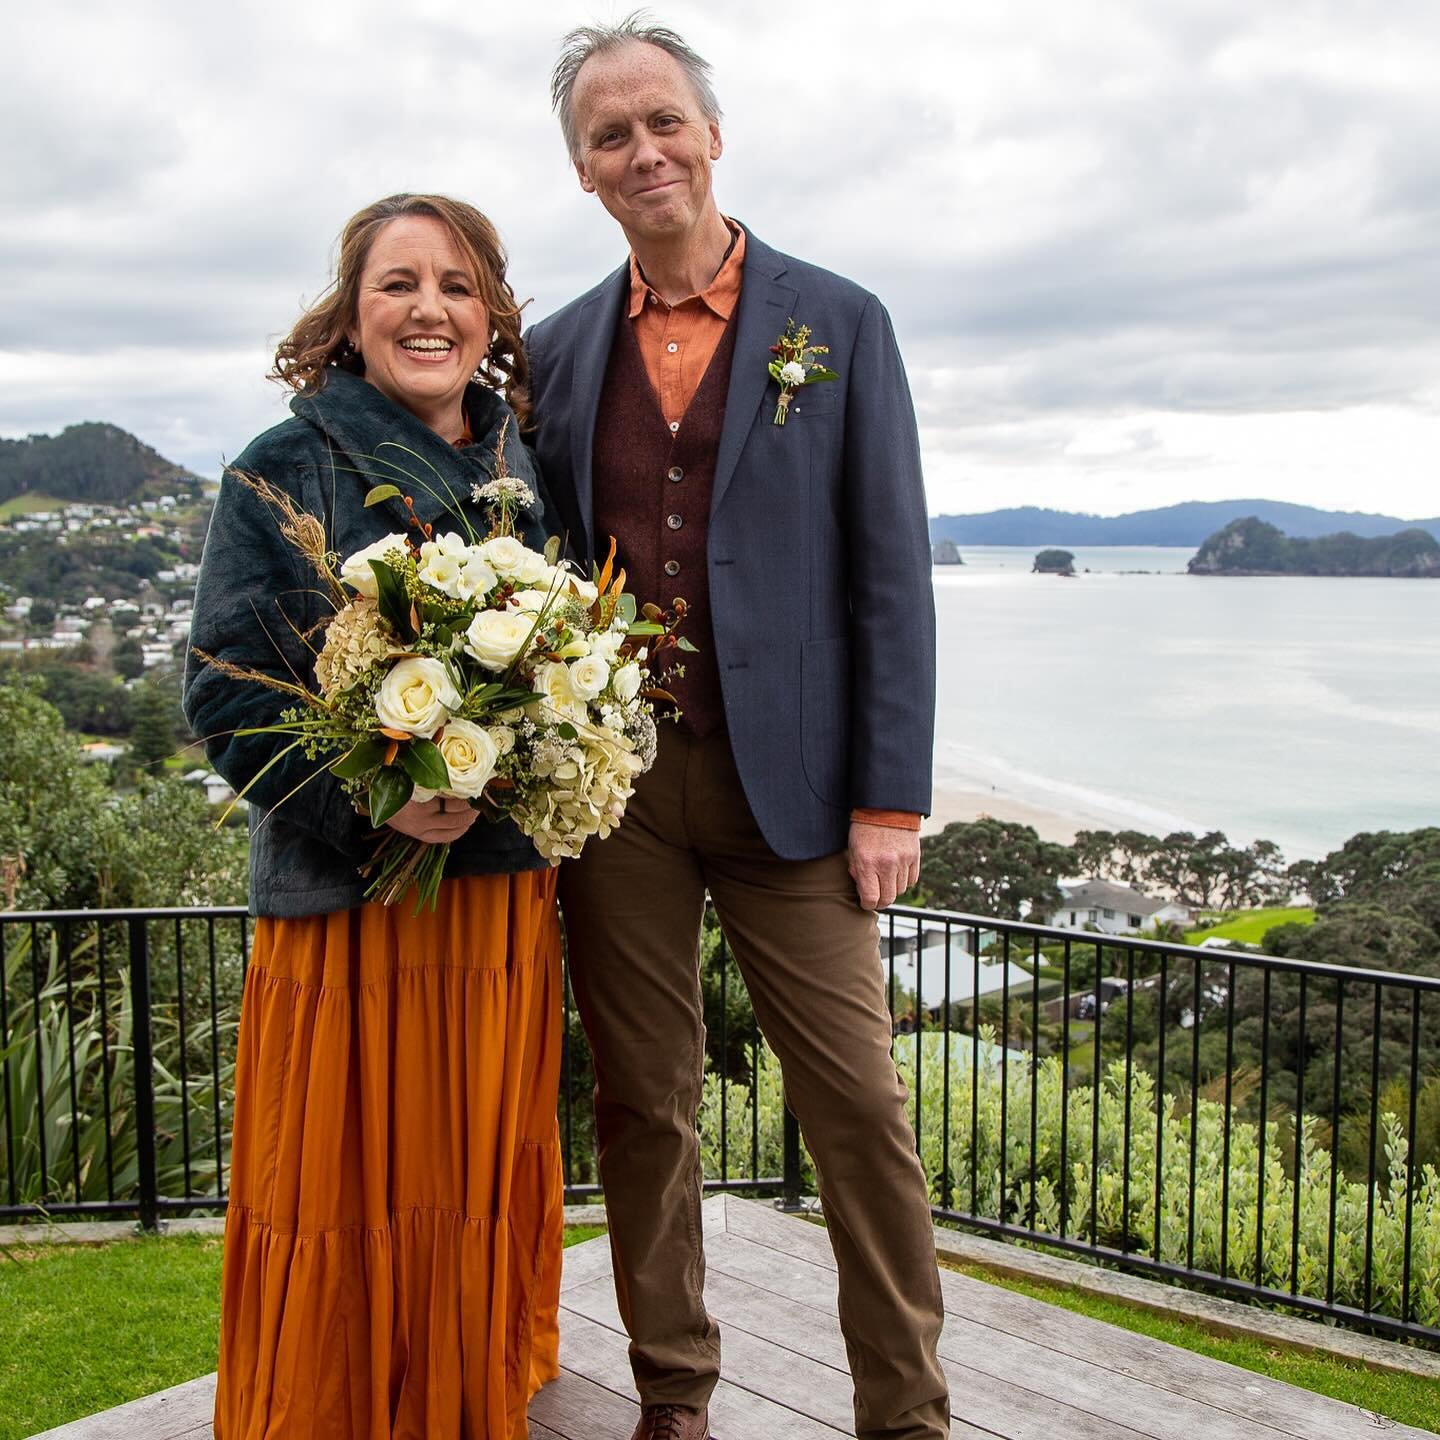 Elopements are even better in New Zealands shoulder season (May-Sept) The beaches are quieter,skies are clear, and you have more space to fully relax into paradise! Get in touch to find out how with Coromandel Elopements! 🌿🌿🌿
www.coromandelelopeme